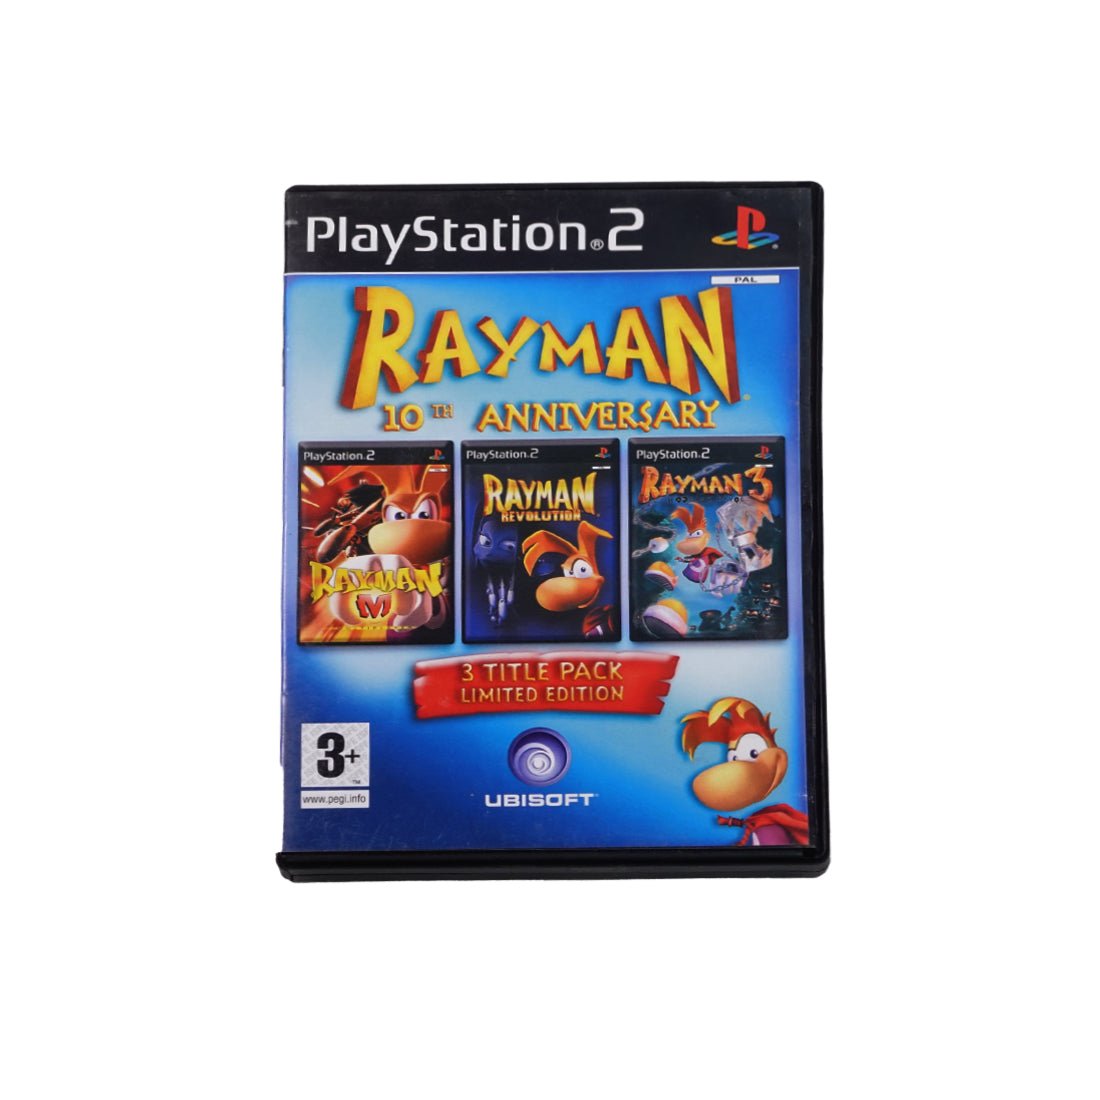 (Pre-Owned) Rayman 10th Anniversary - PlayStation 2 - Store 974 | ستور ٩٧٤